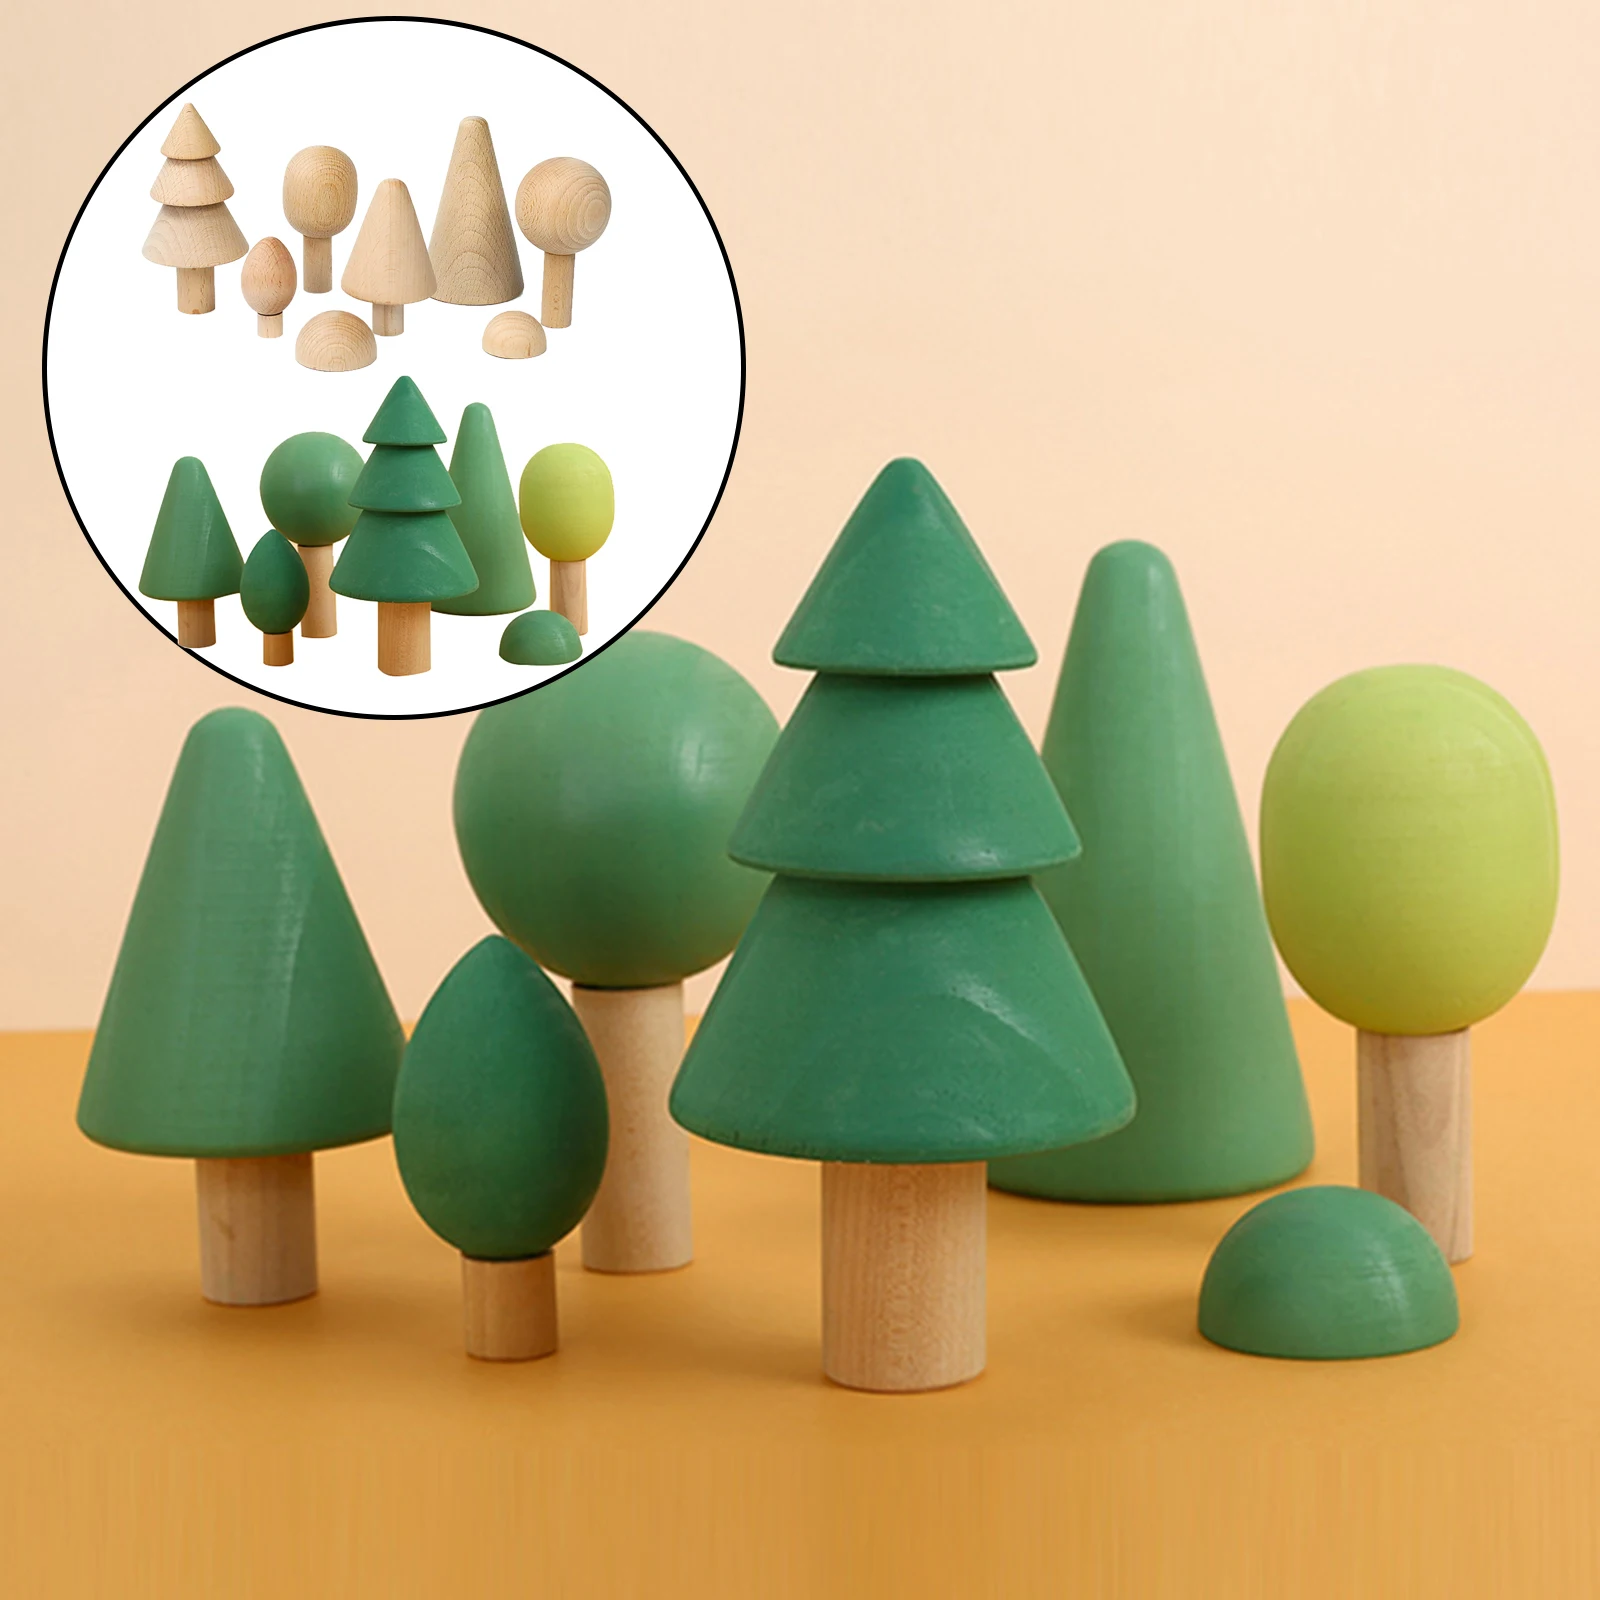 7 PCS Wood Blocks Building Tree Shape Stacker Handcrafted Fun Toy Home Decor